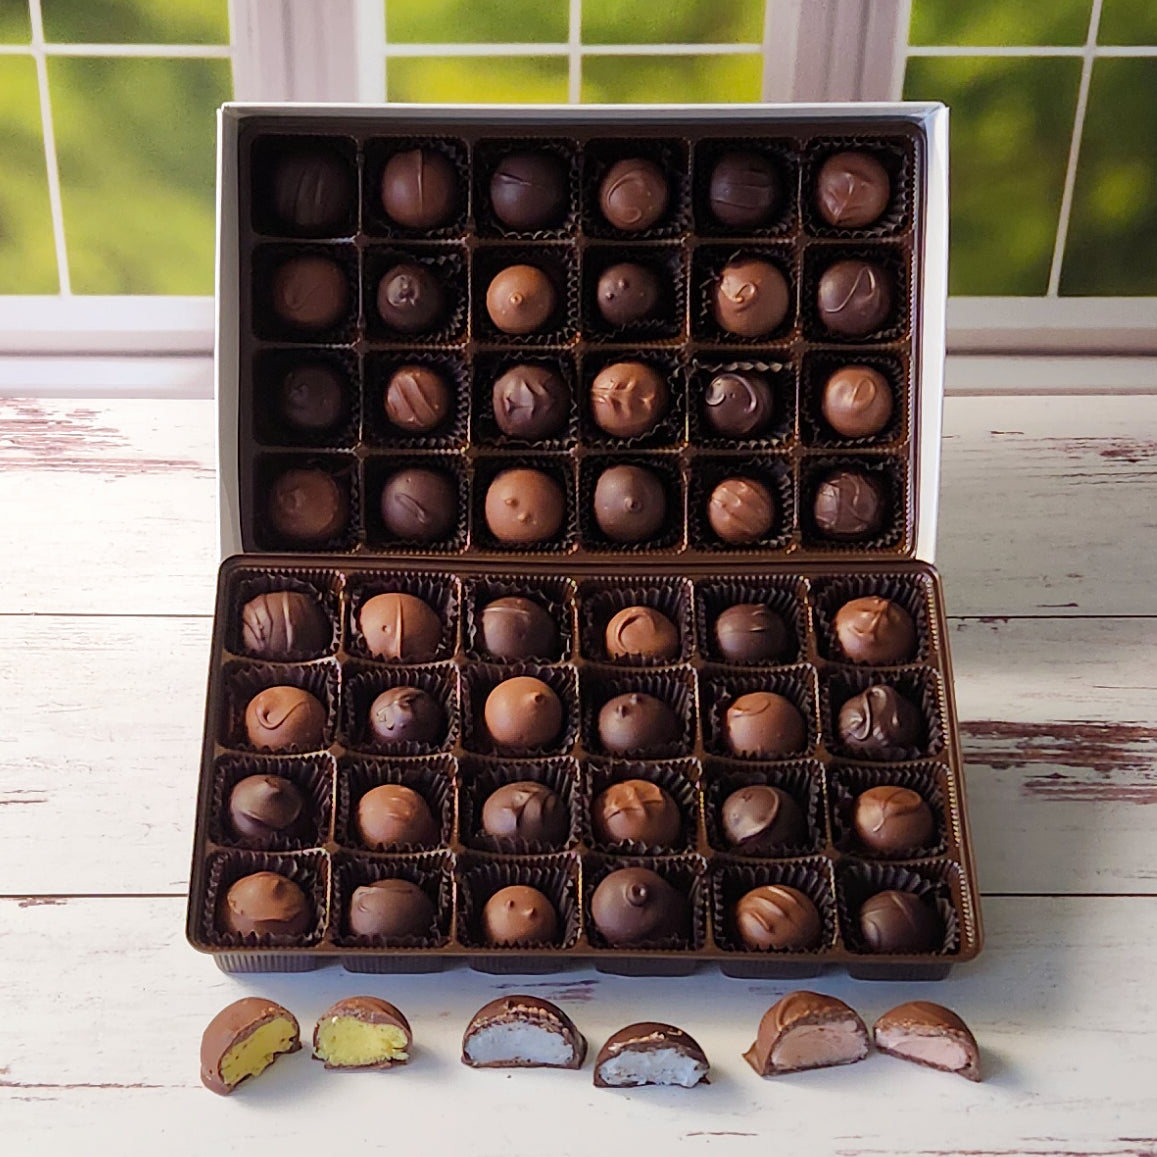 This large candy assortment features 48 pieces of our milk and dark chocolate soft center creams. Perfect for sharing at parties or bringing to the office for everyone to enjoy.